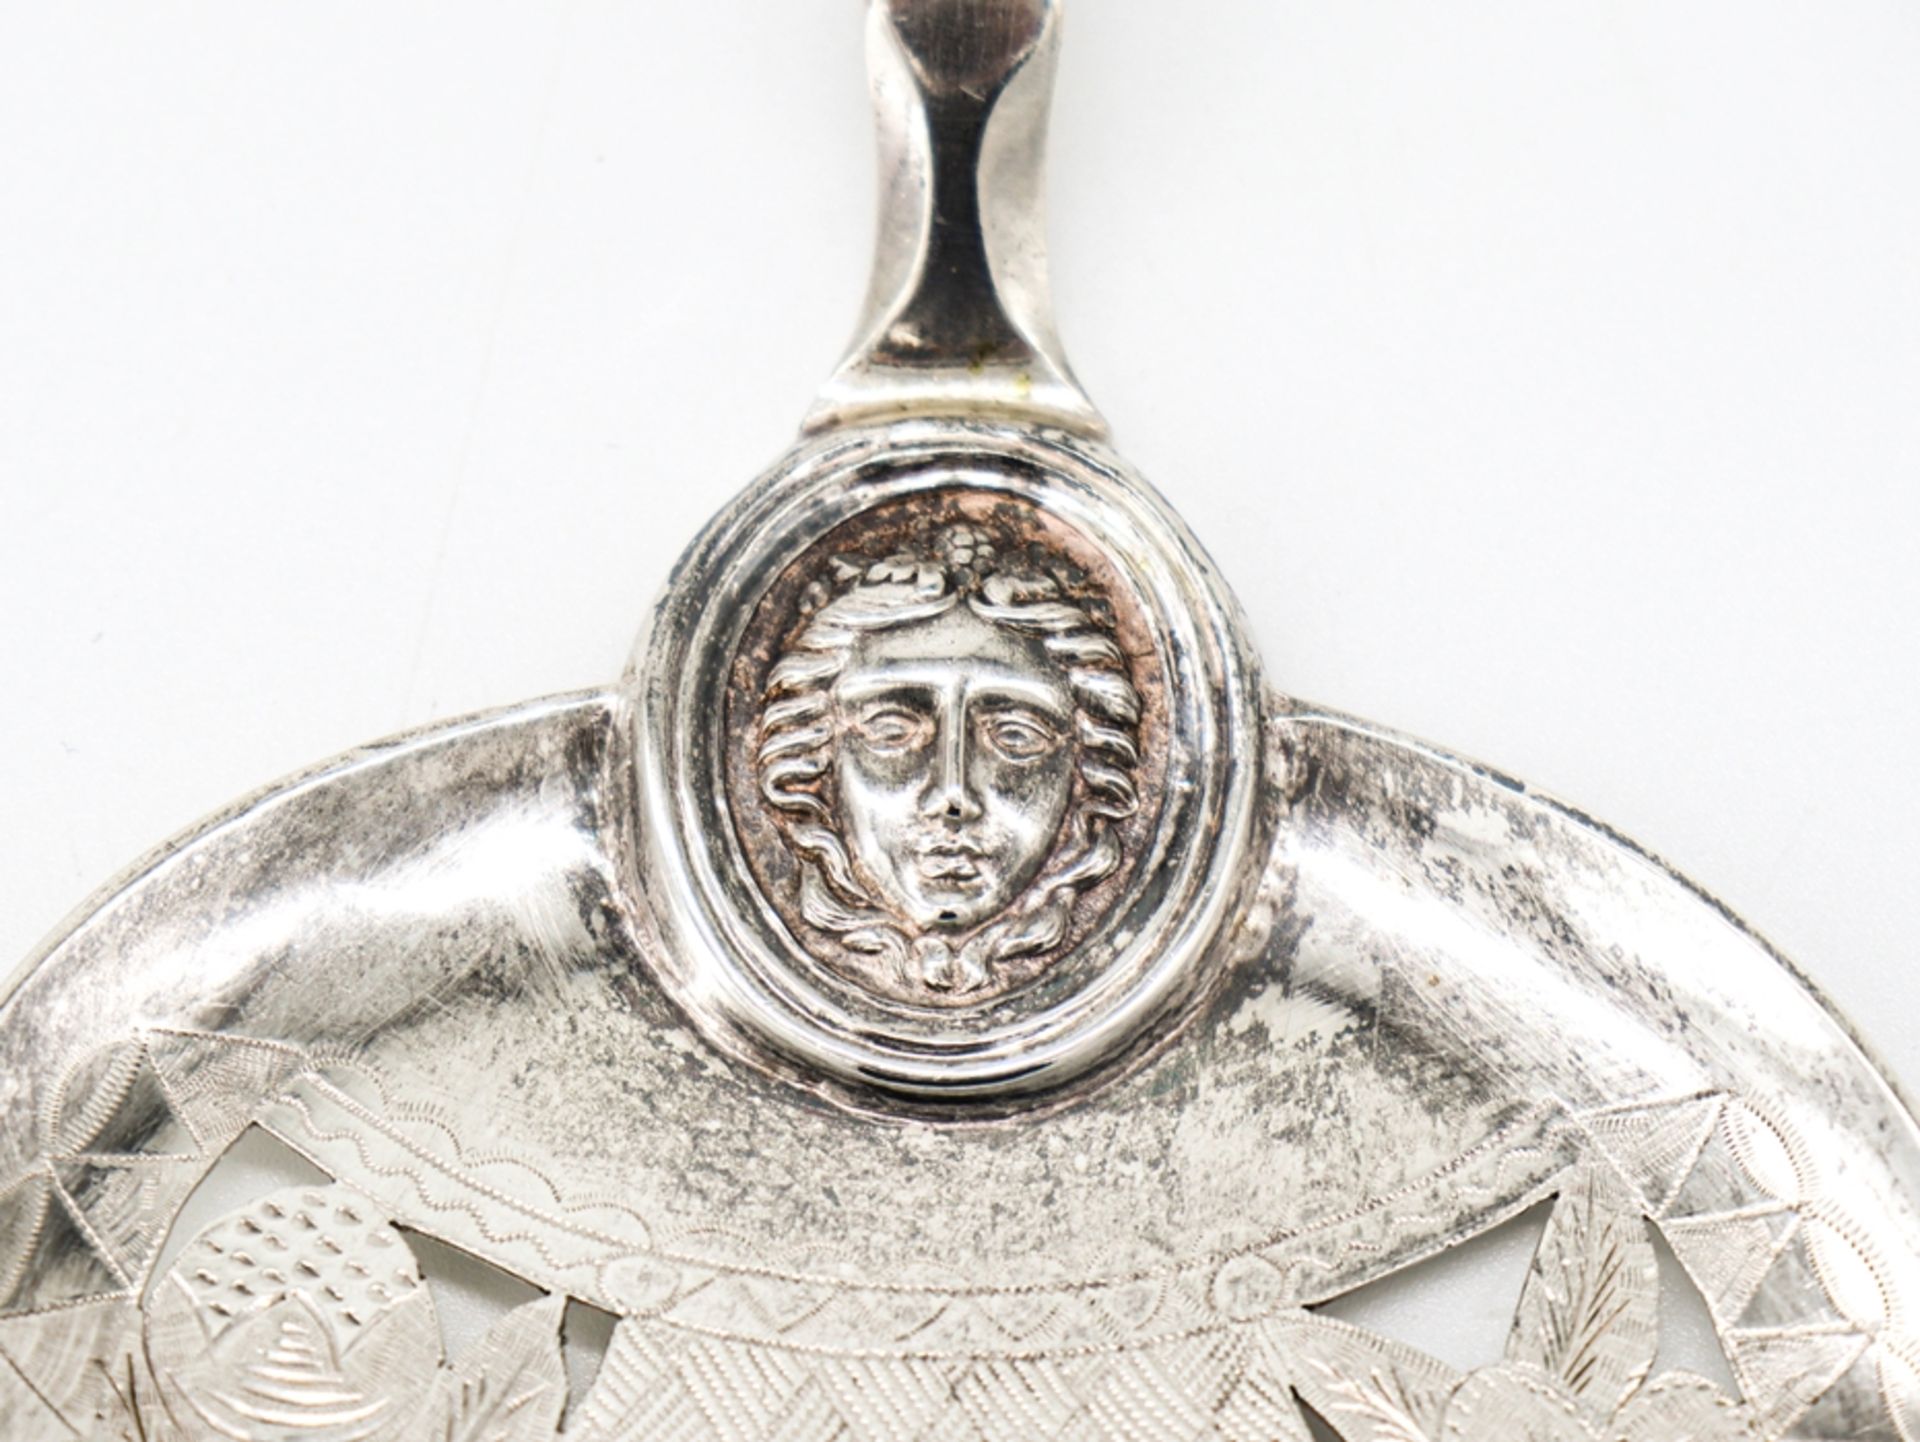 Pâté server with leg handle, chased silver, finest chasing, around 1800 - Image 6 of 7